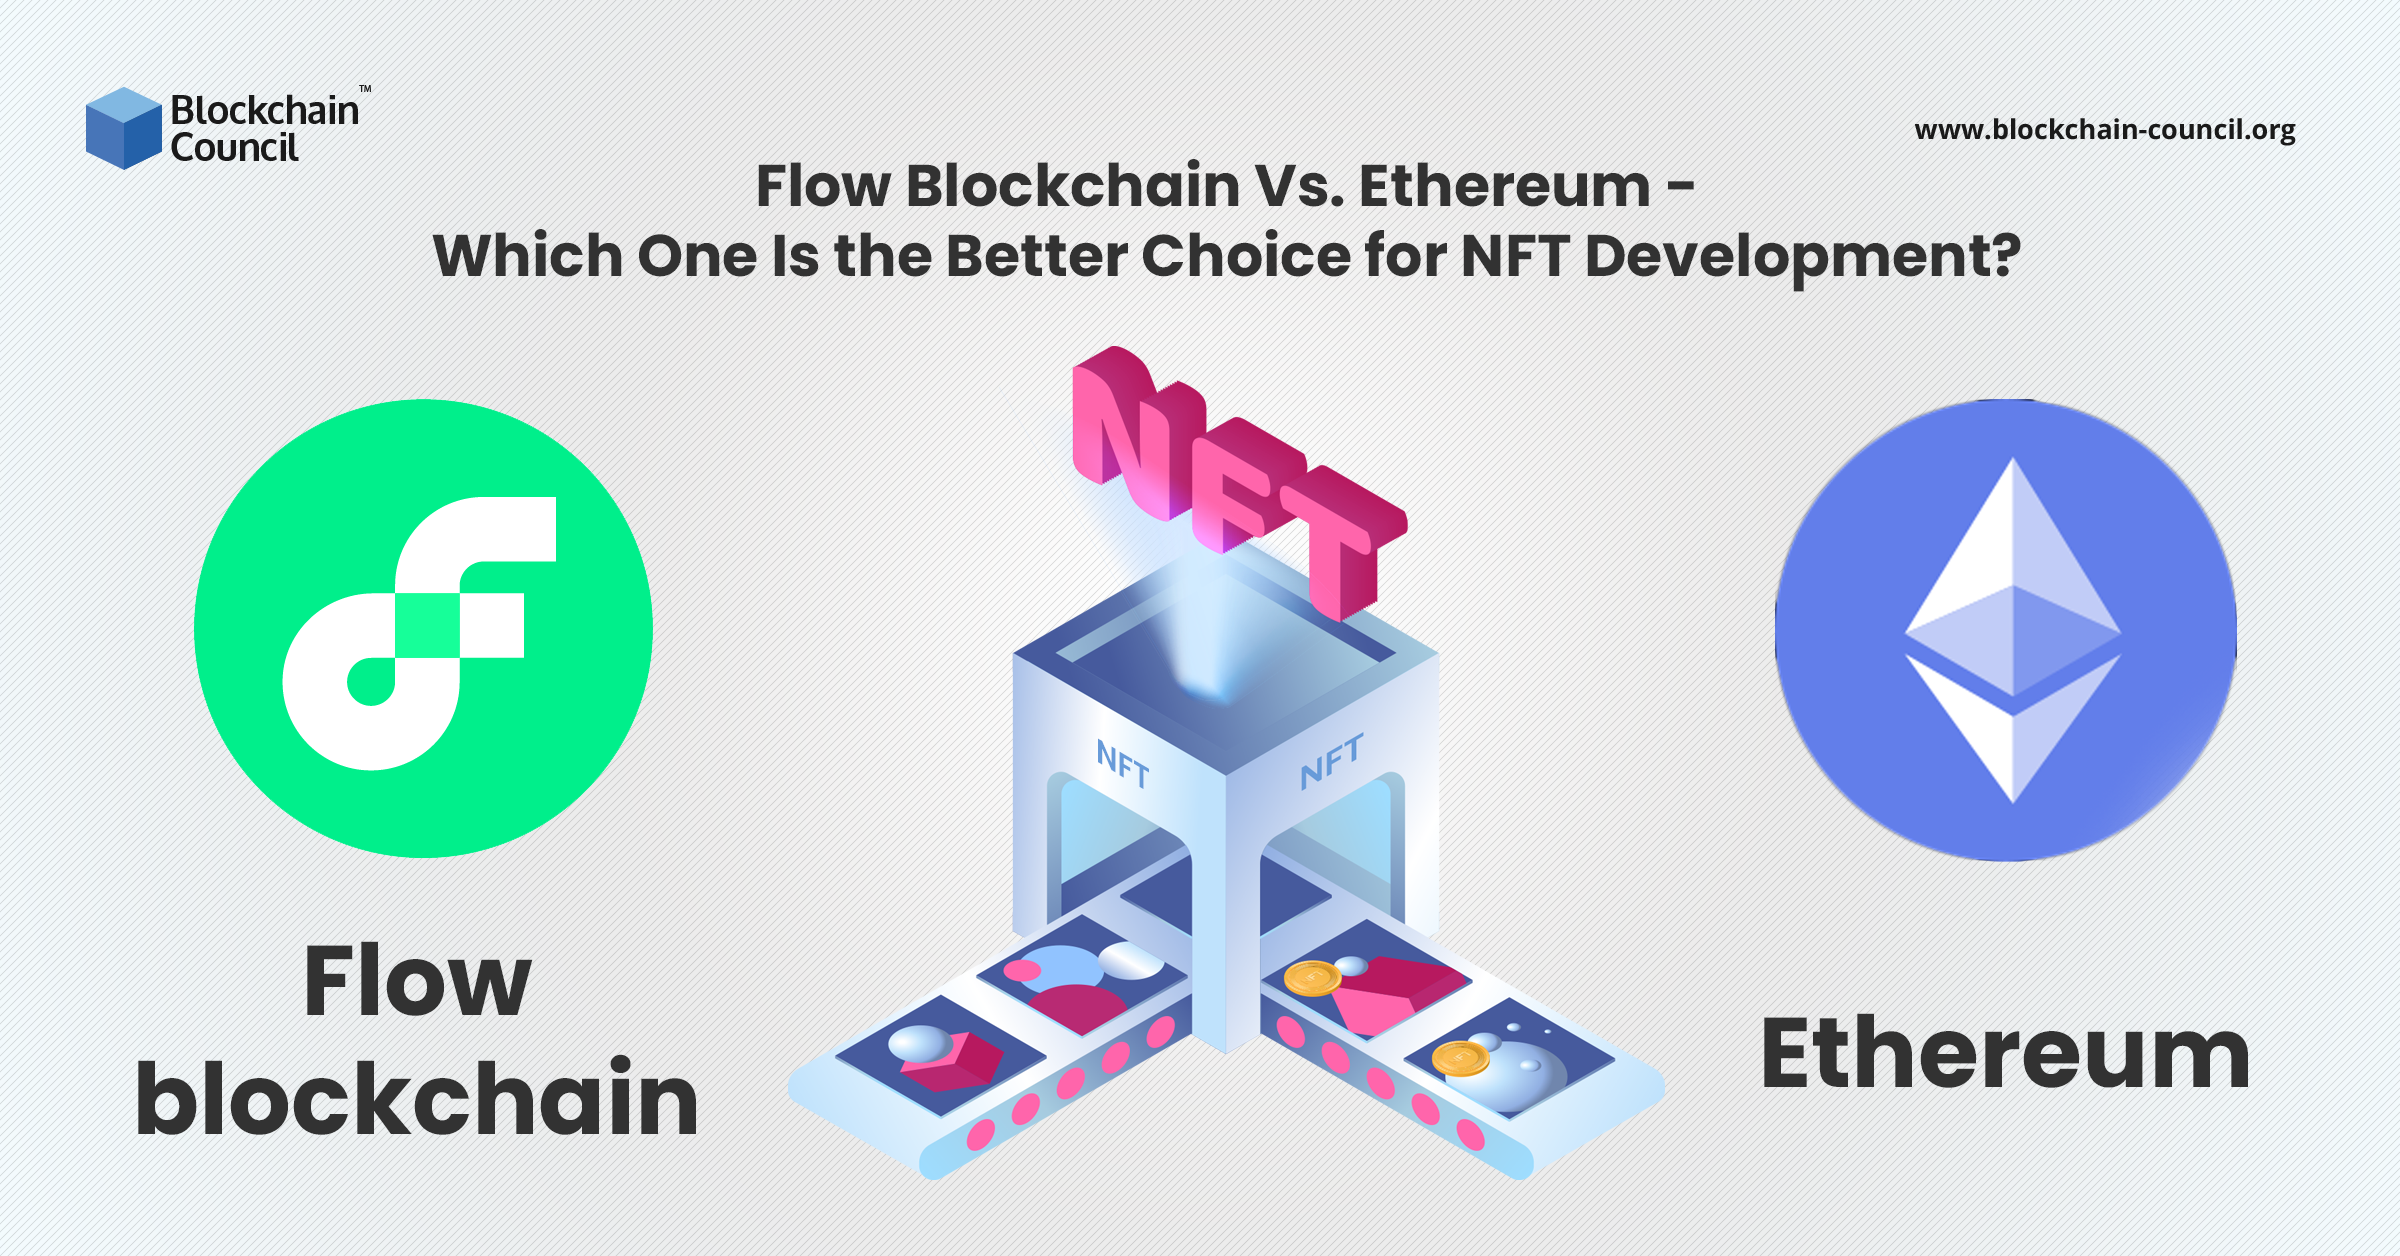 Flow Blockchain Vs. Ethereum - Which One Is the Better Choice for NFT Development